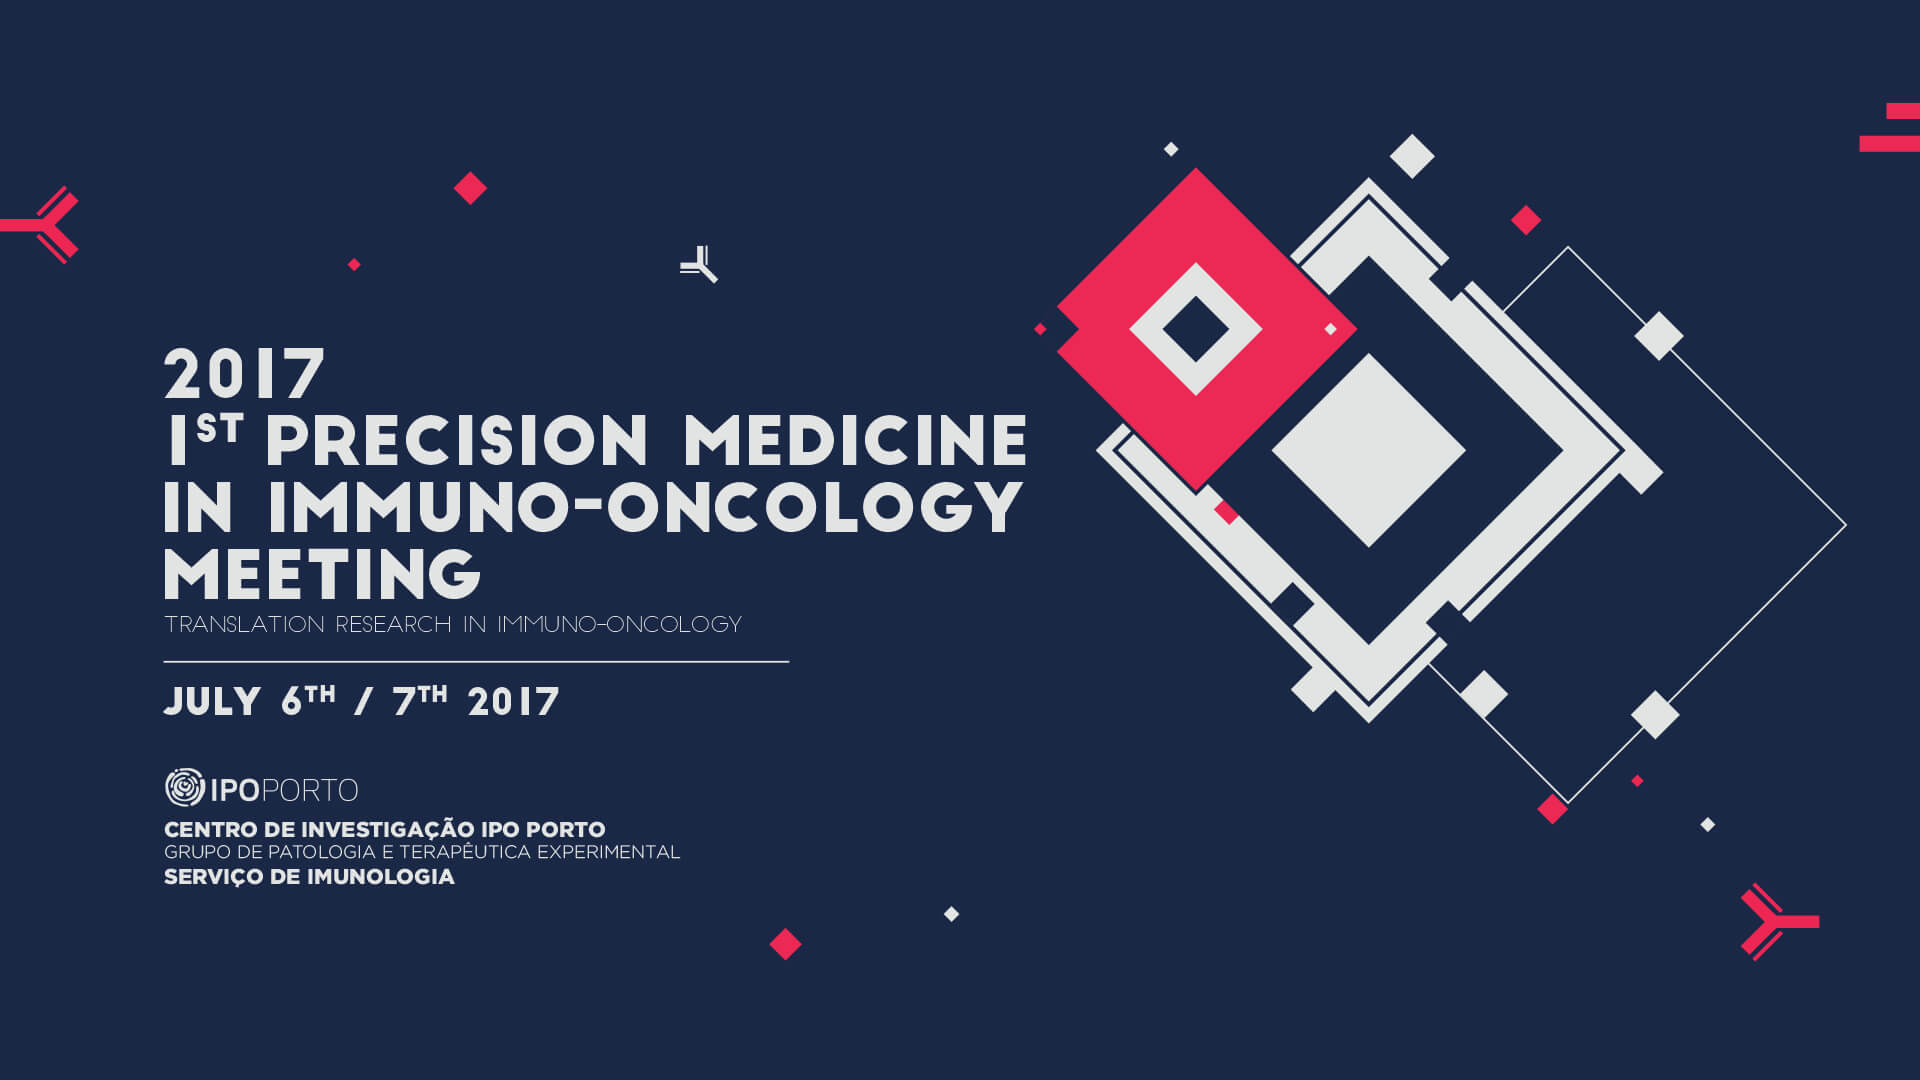 1st Precision Medicine in Immuno-Oncology Meeting